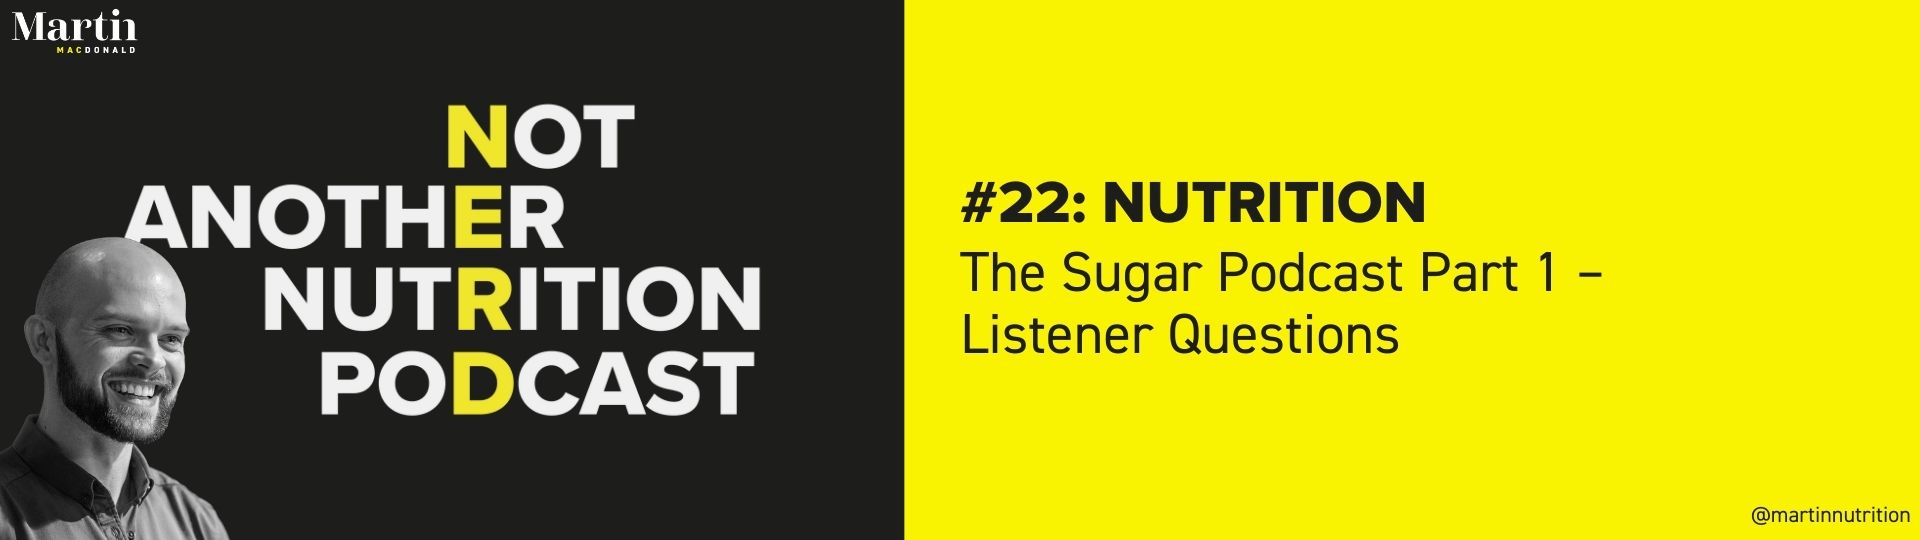 The Sugar Podcast Listener Questions Part 1